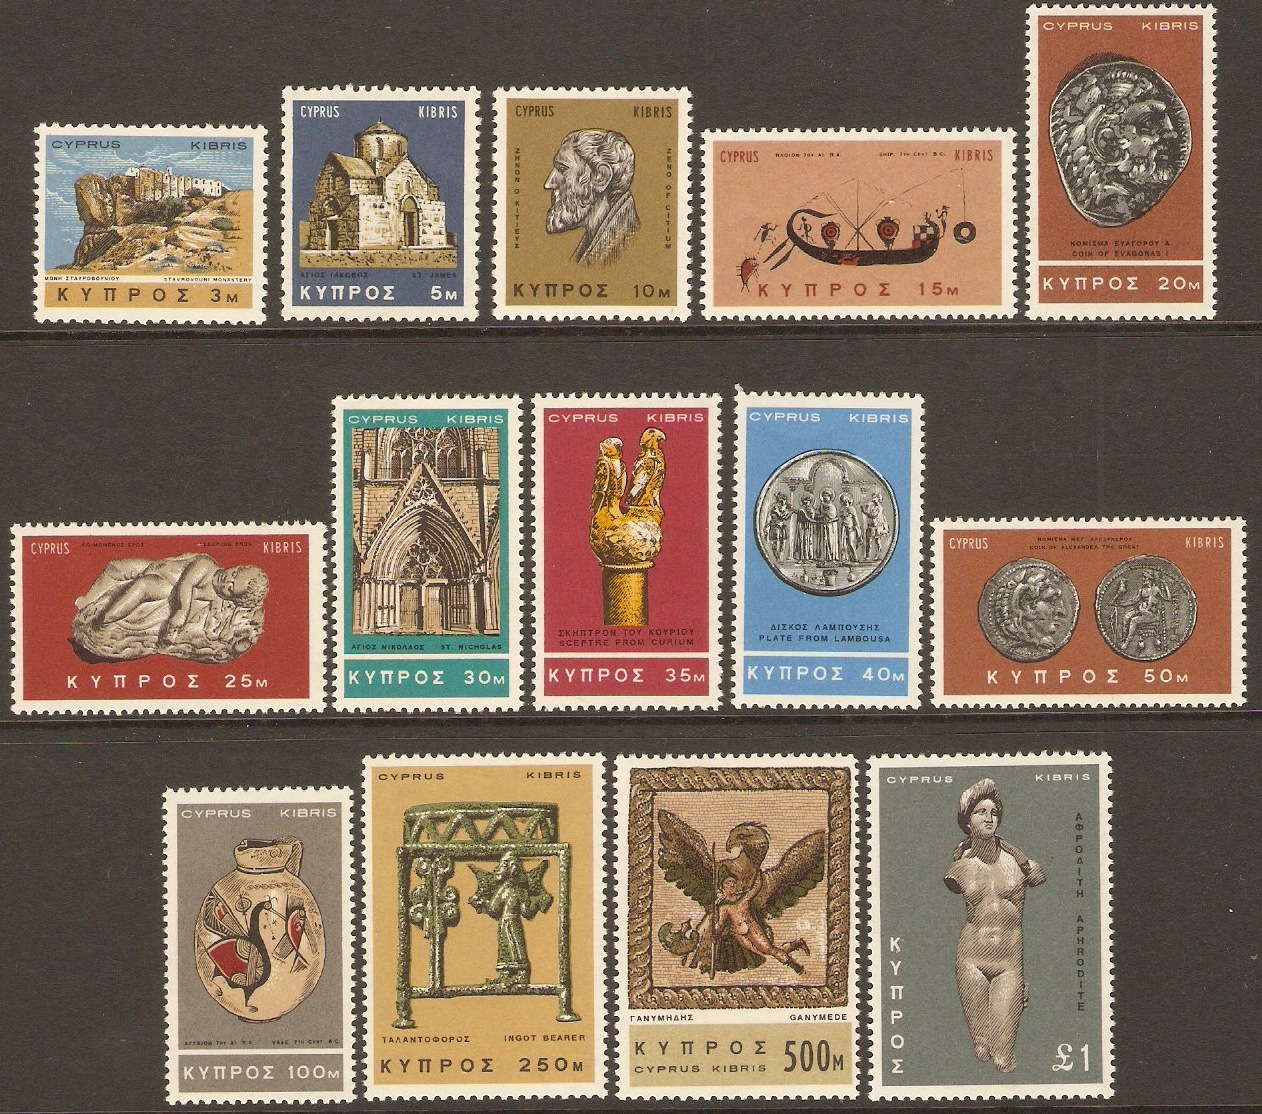 Cyprus 1966 Buildings and Artifacts Set. SG283-SG293.